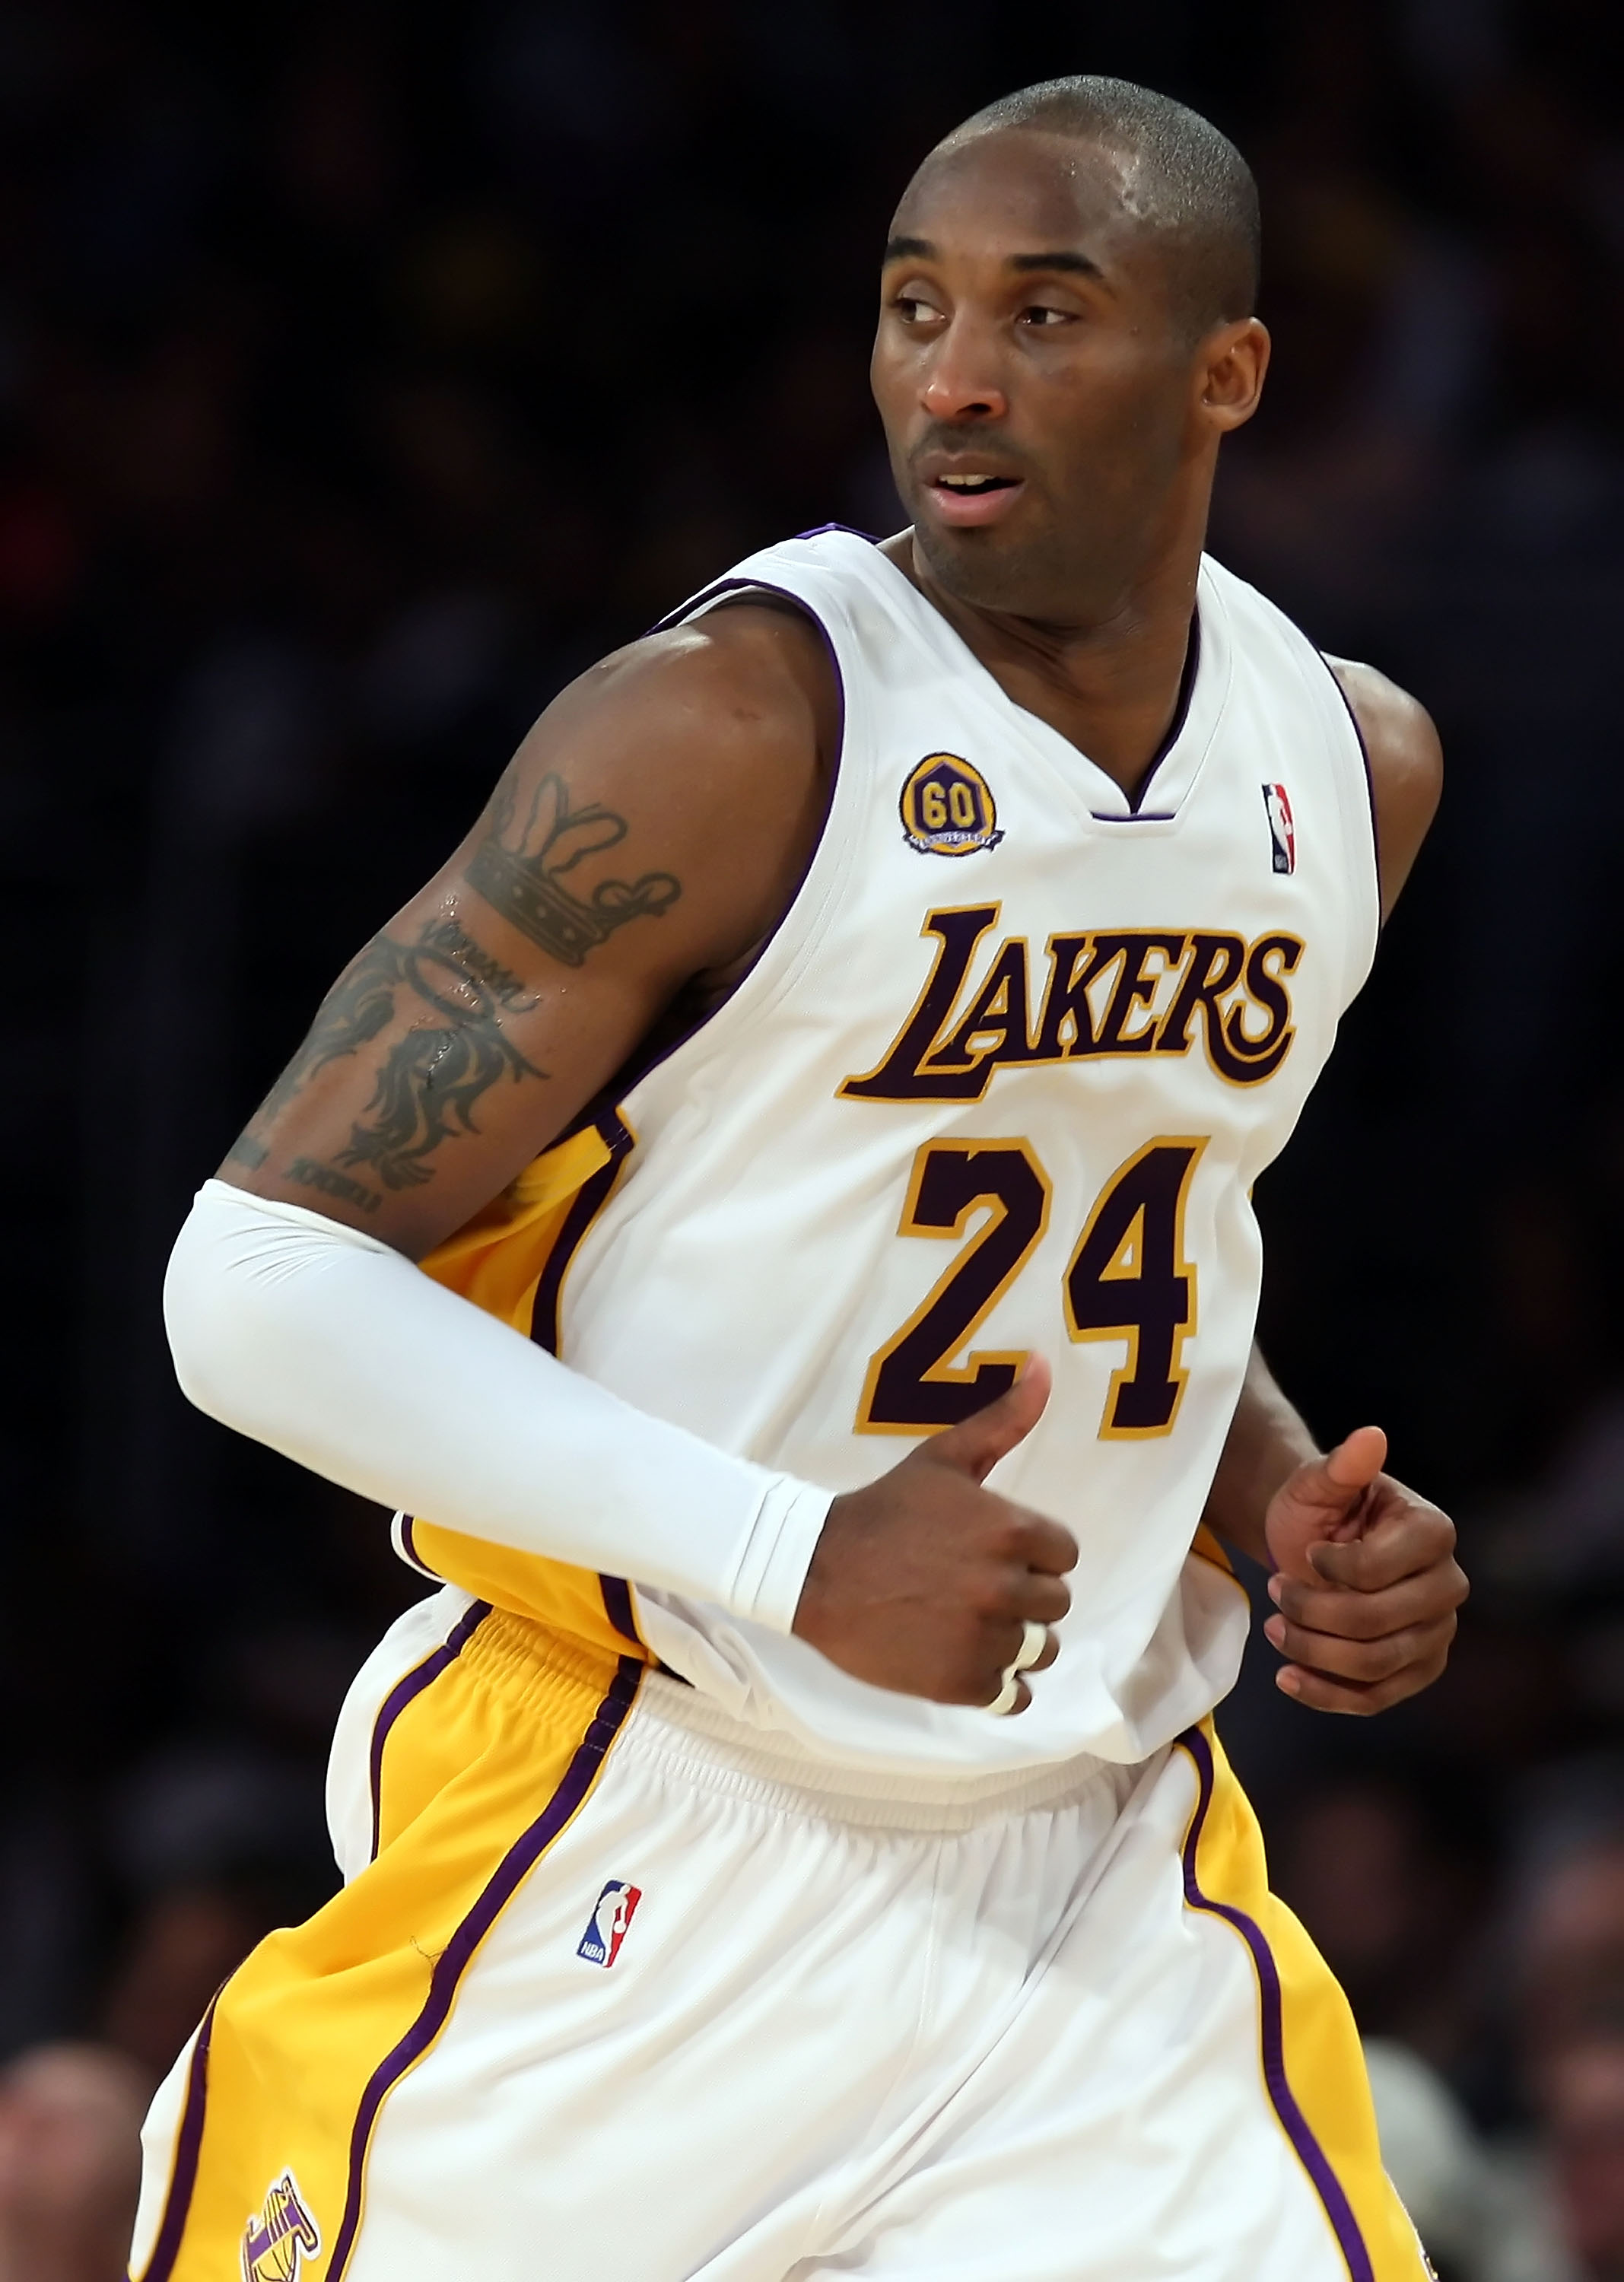 24 powerful photos by which to remember Kobe Bryant